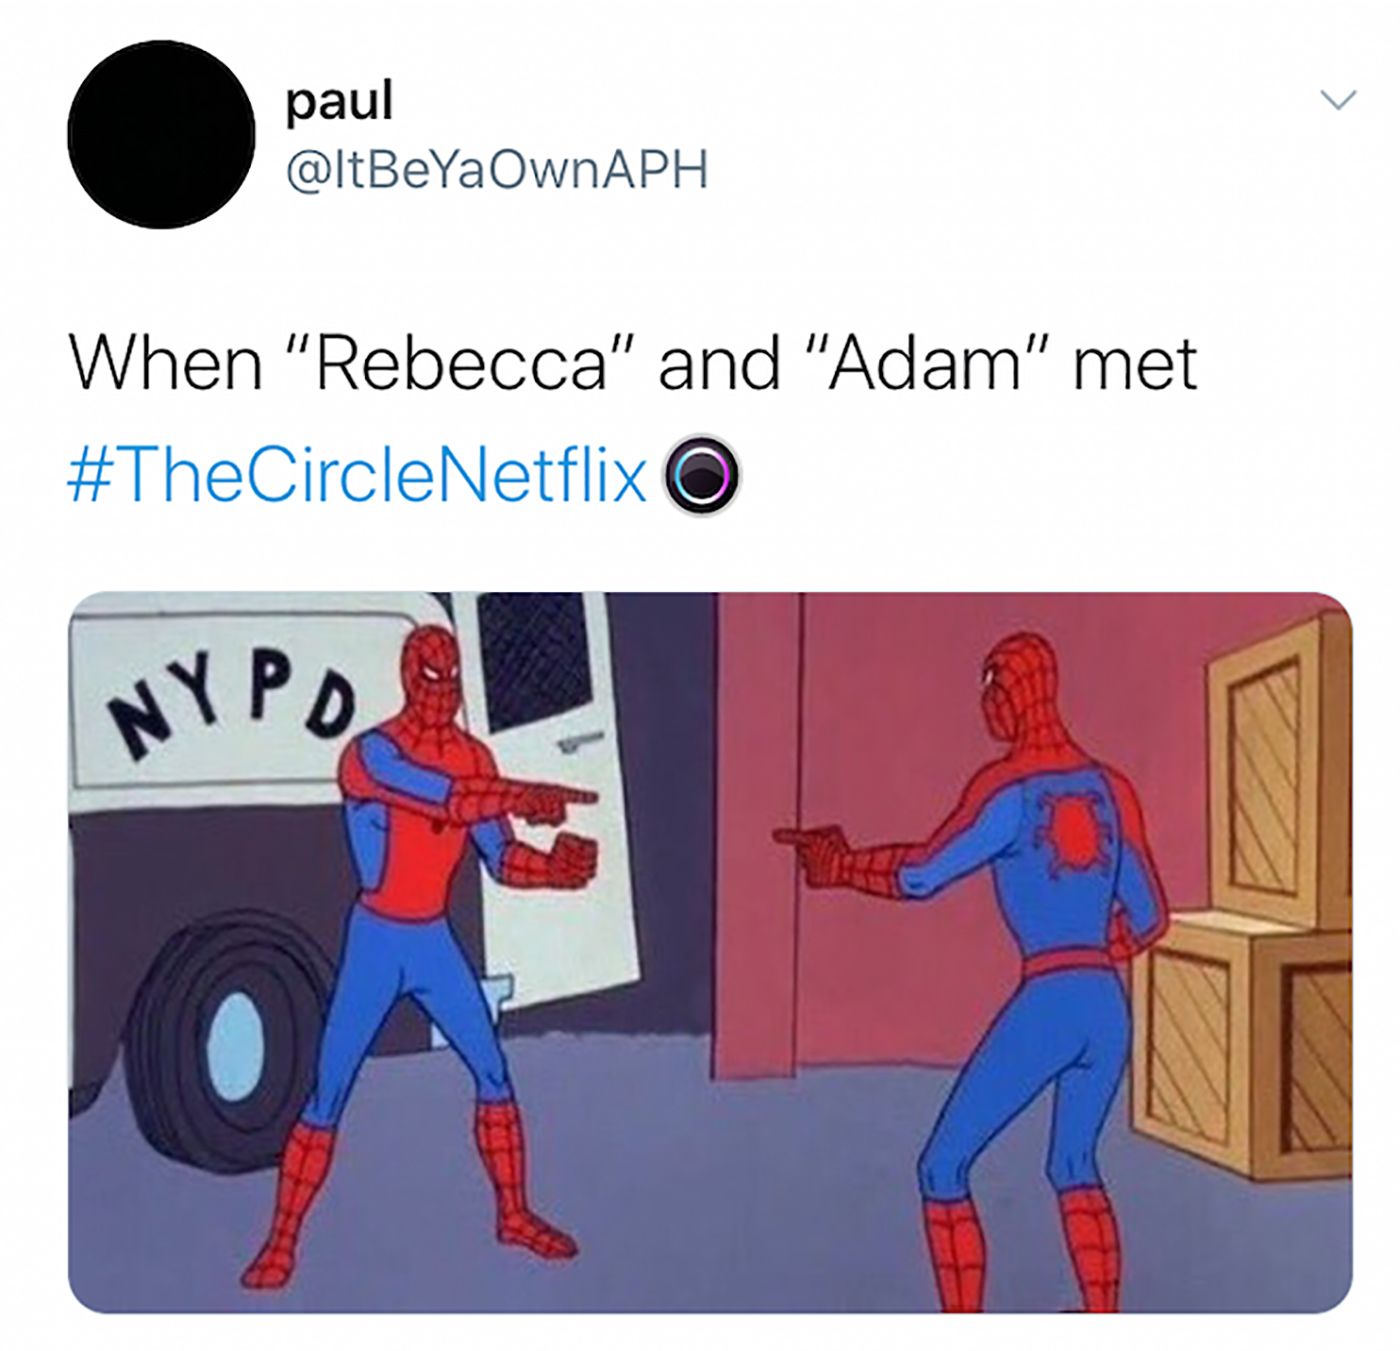 A Spider-man-themed meme about Adam and Rebecca from The Circle.